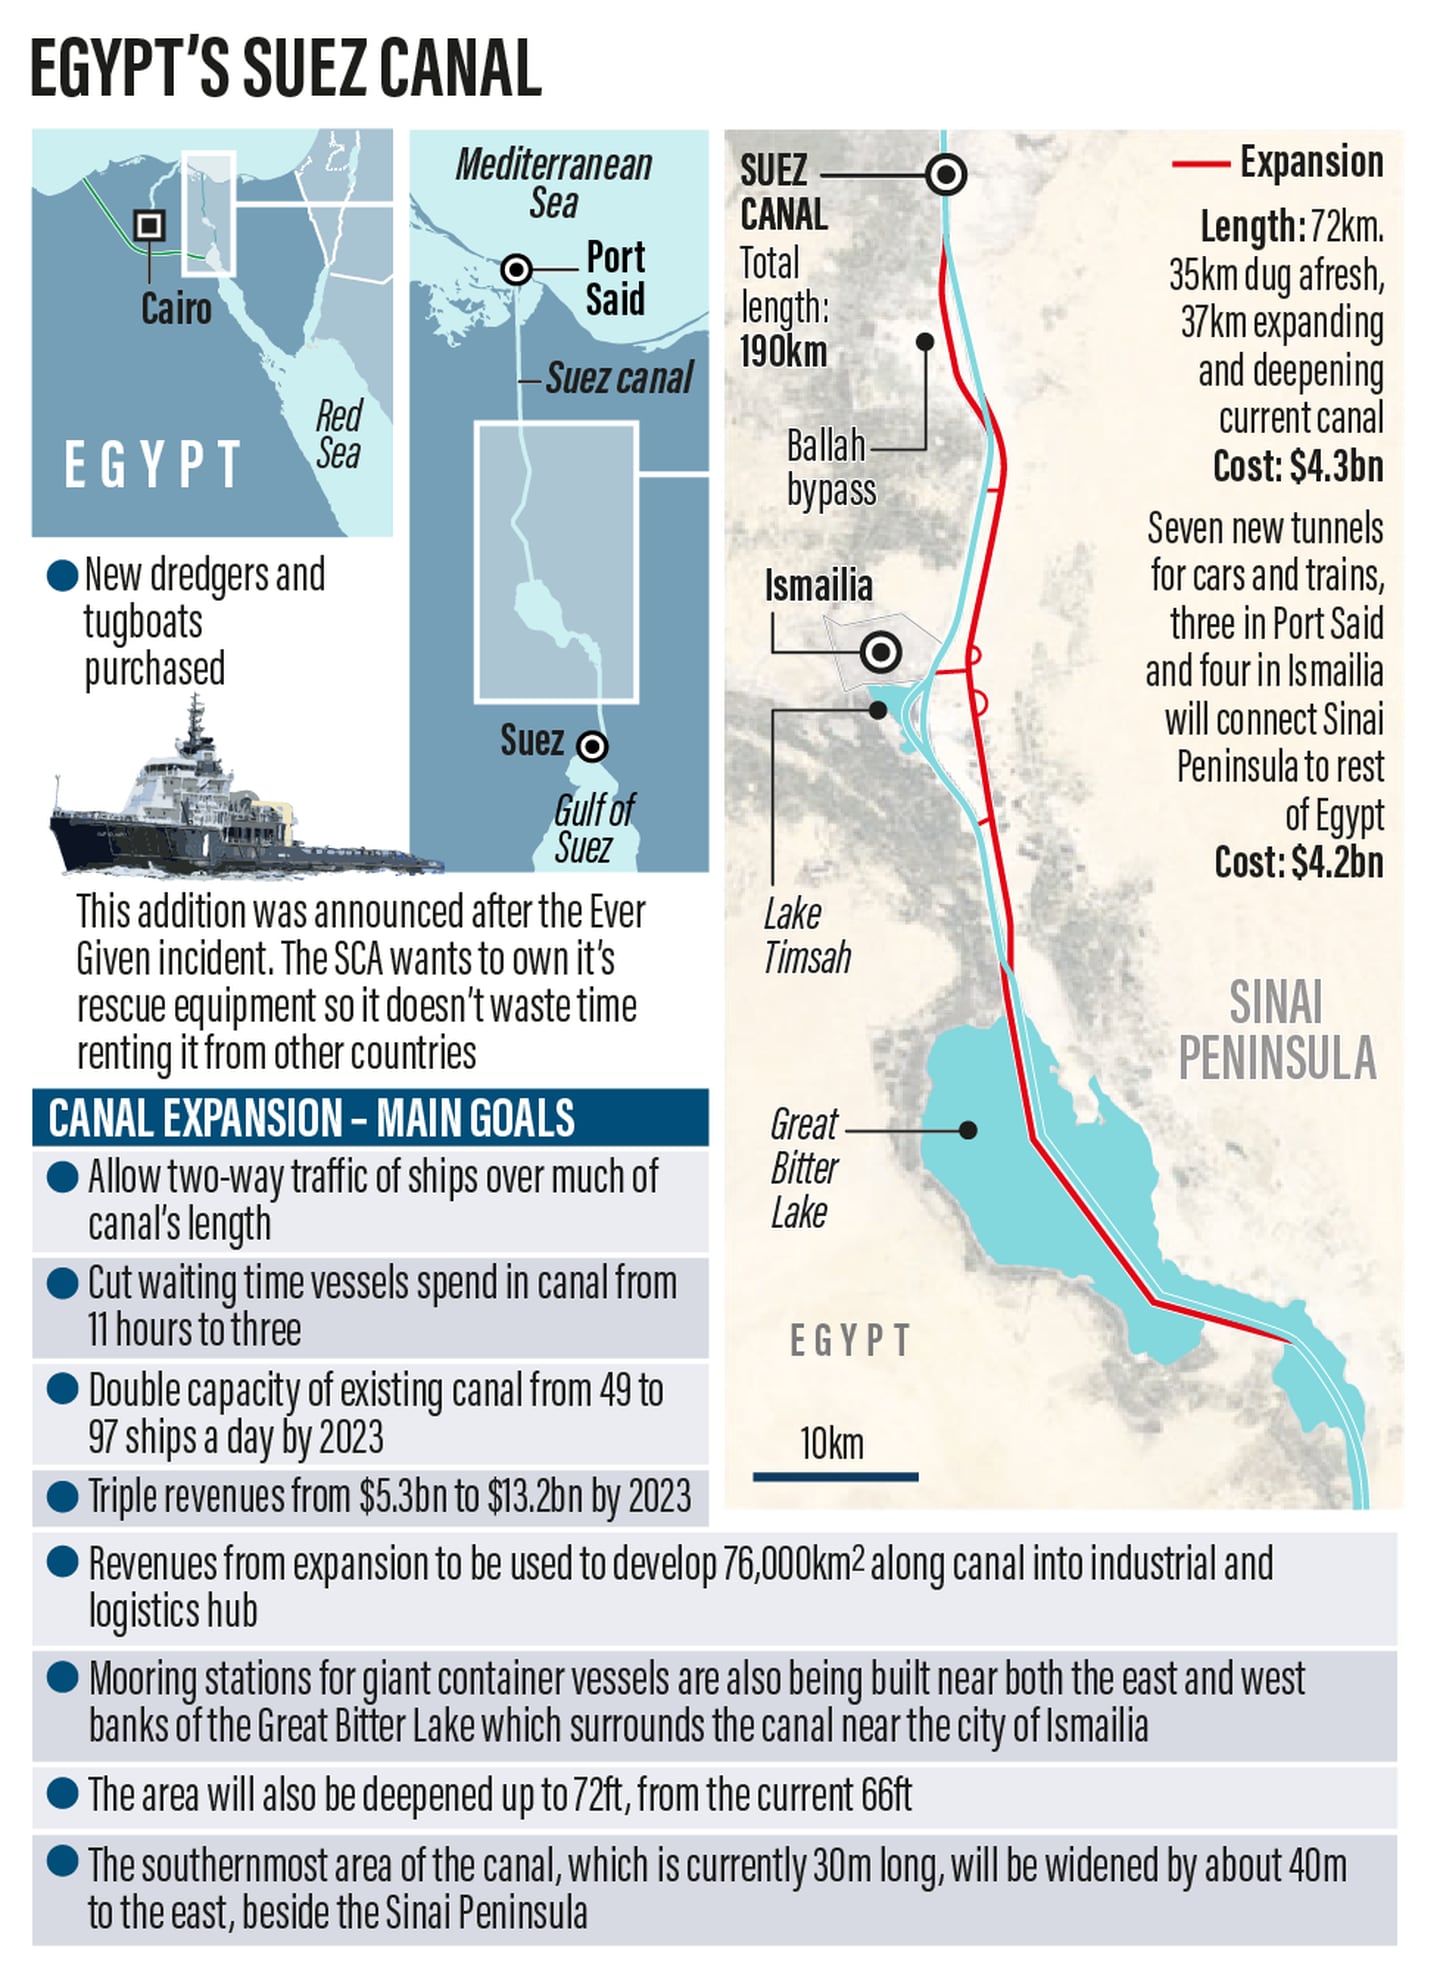 The Suez Canal Authority expansion in numbers